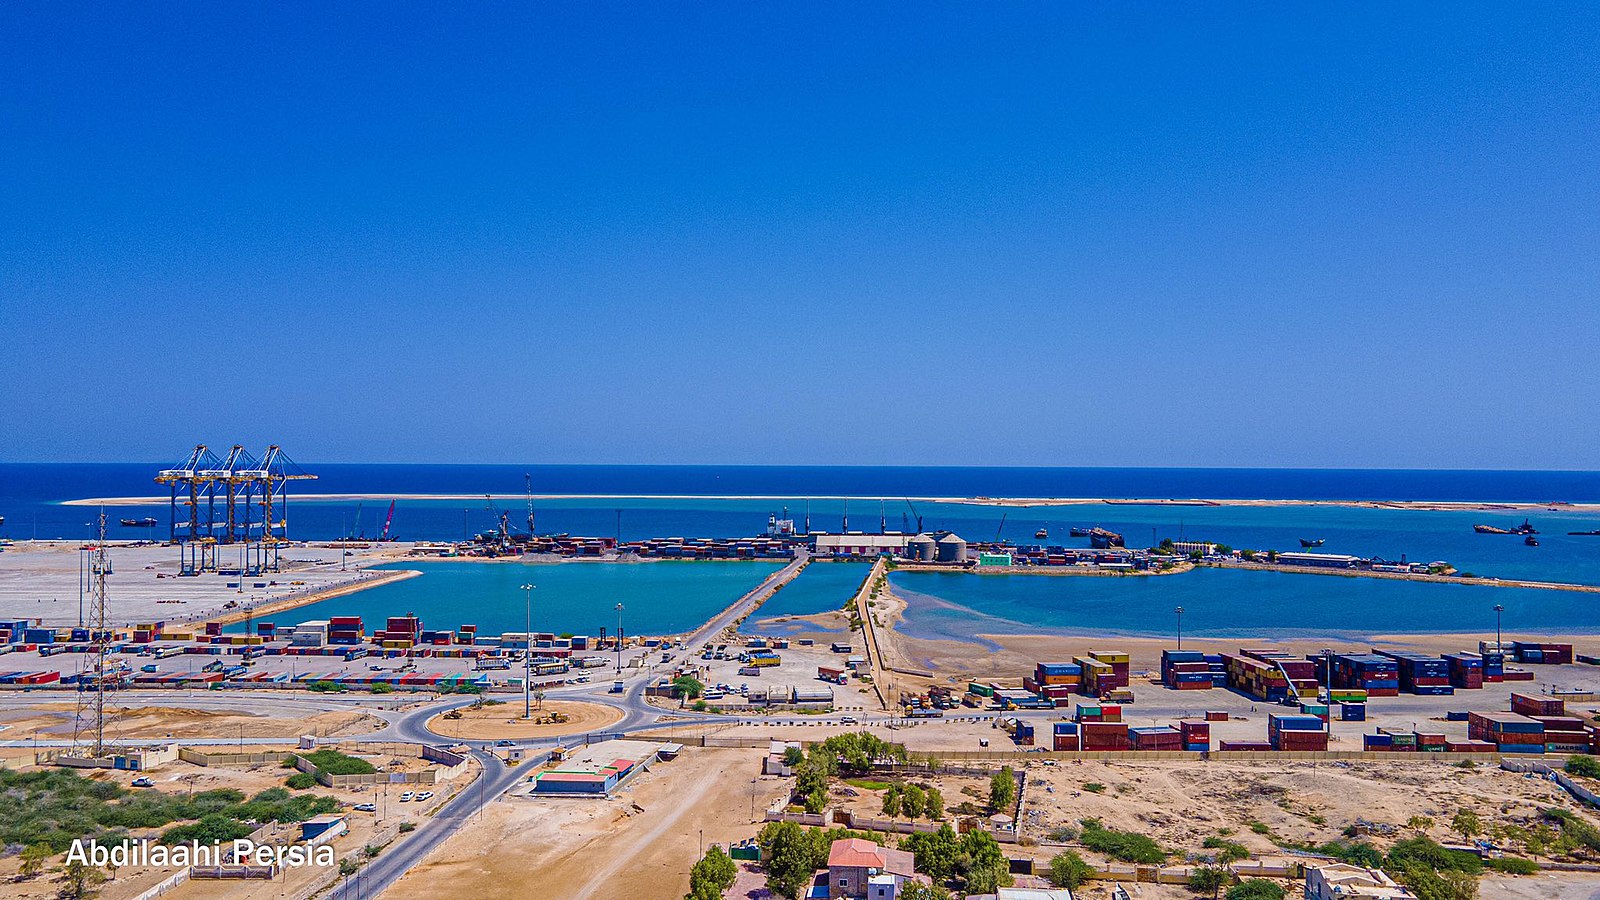 Ethiopia Signs 'Historic' Pact to Use Somaliland's Red Sea Port post image